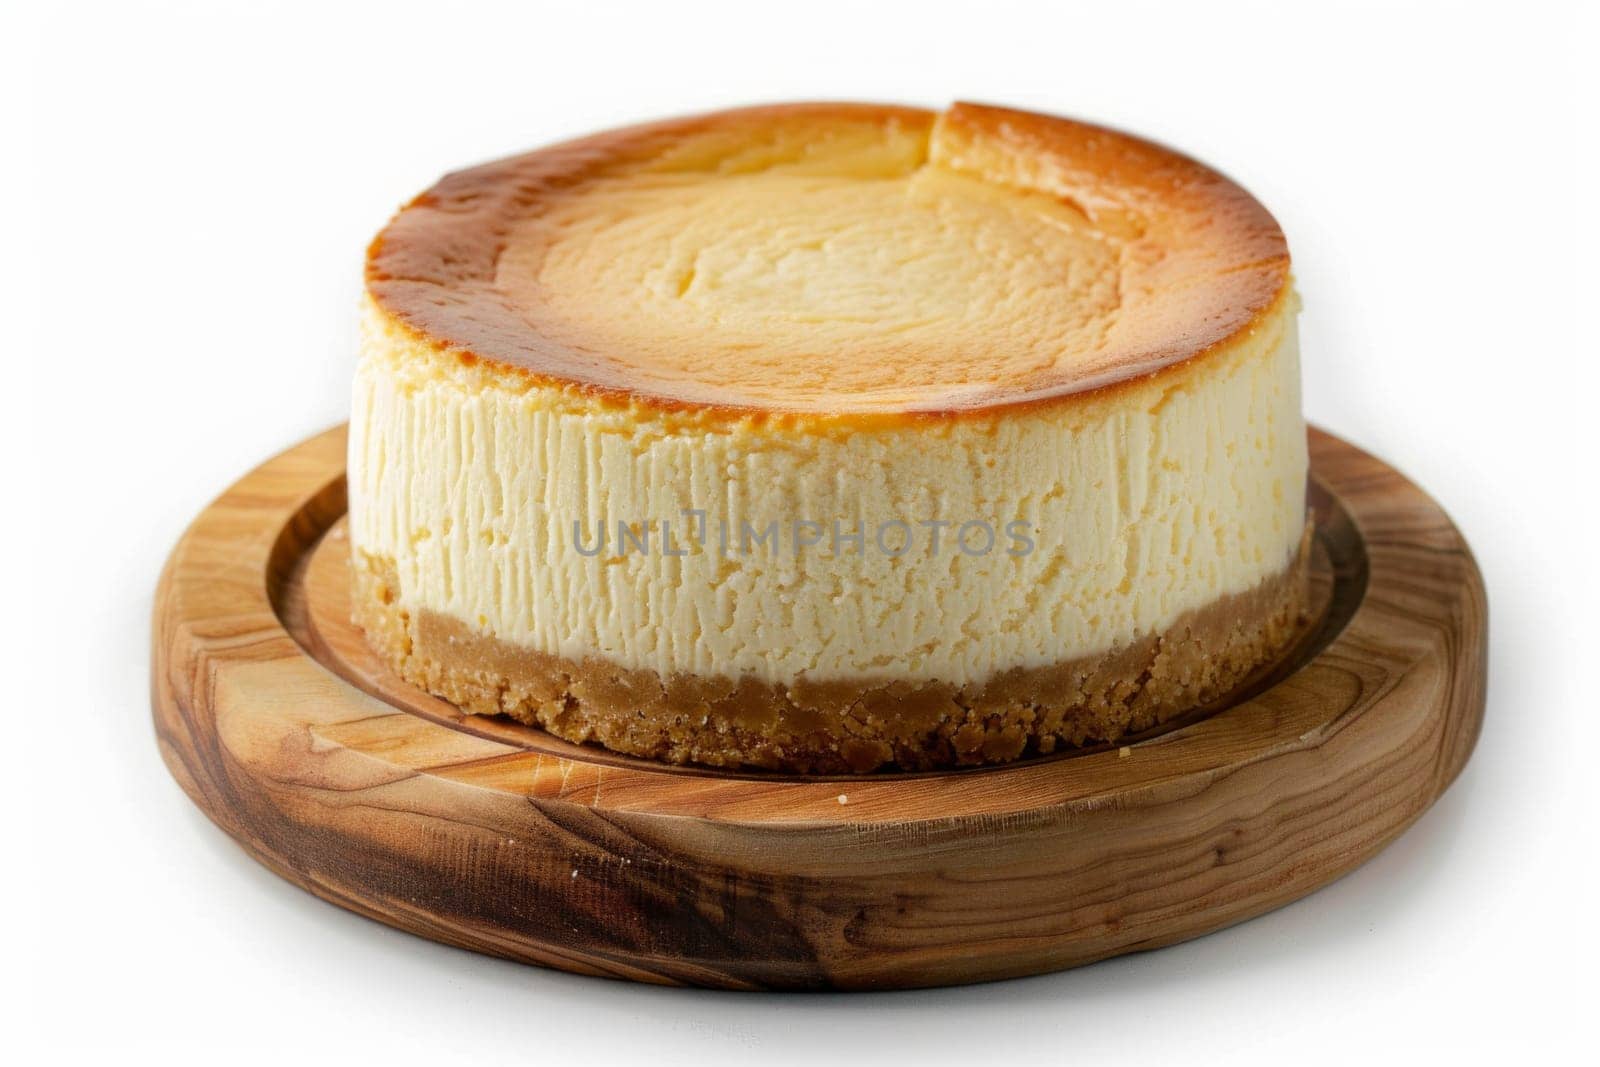 front view of single classic New York cheesecake on a wooden tray isolated on a white background.